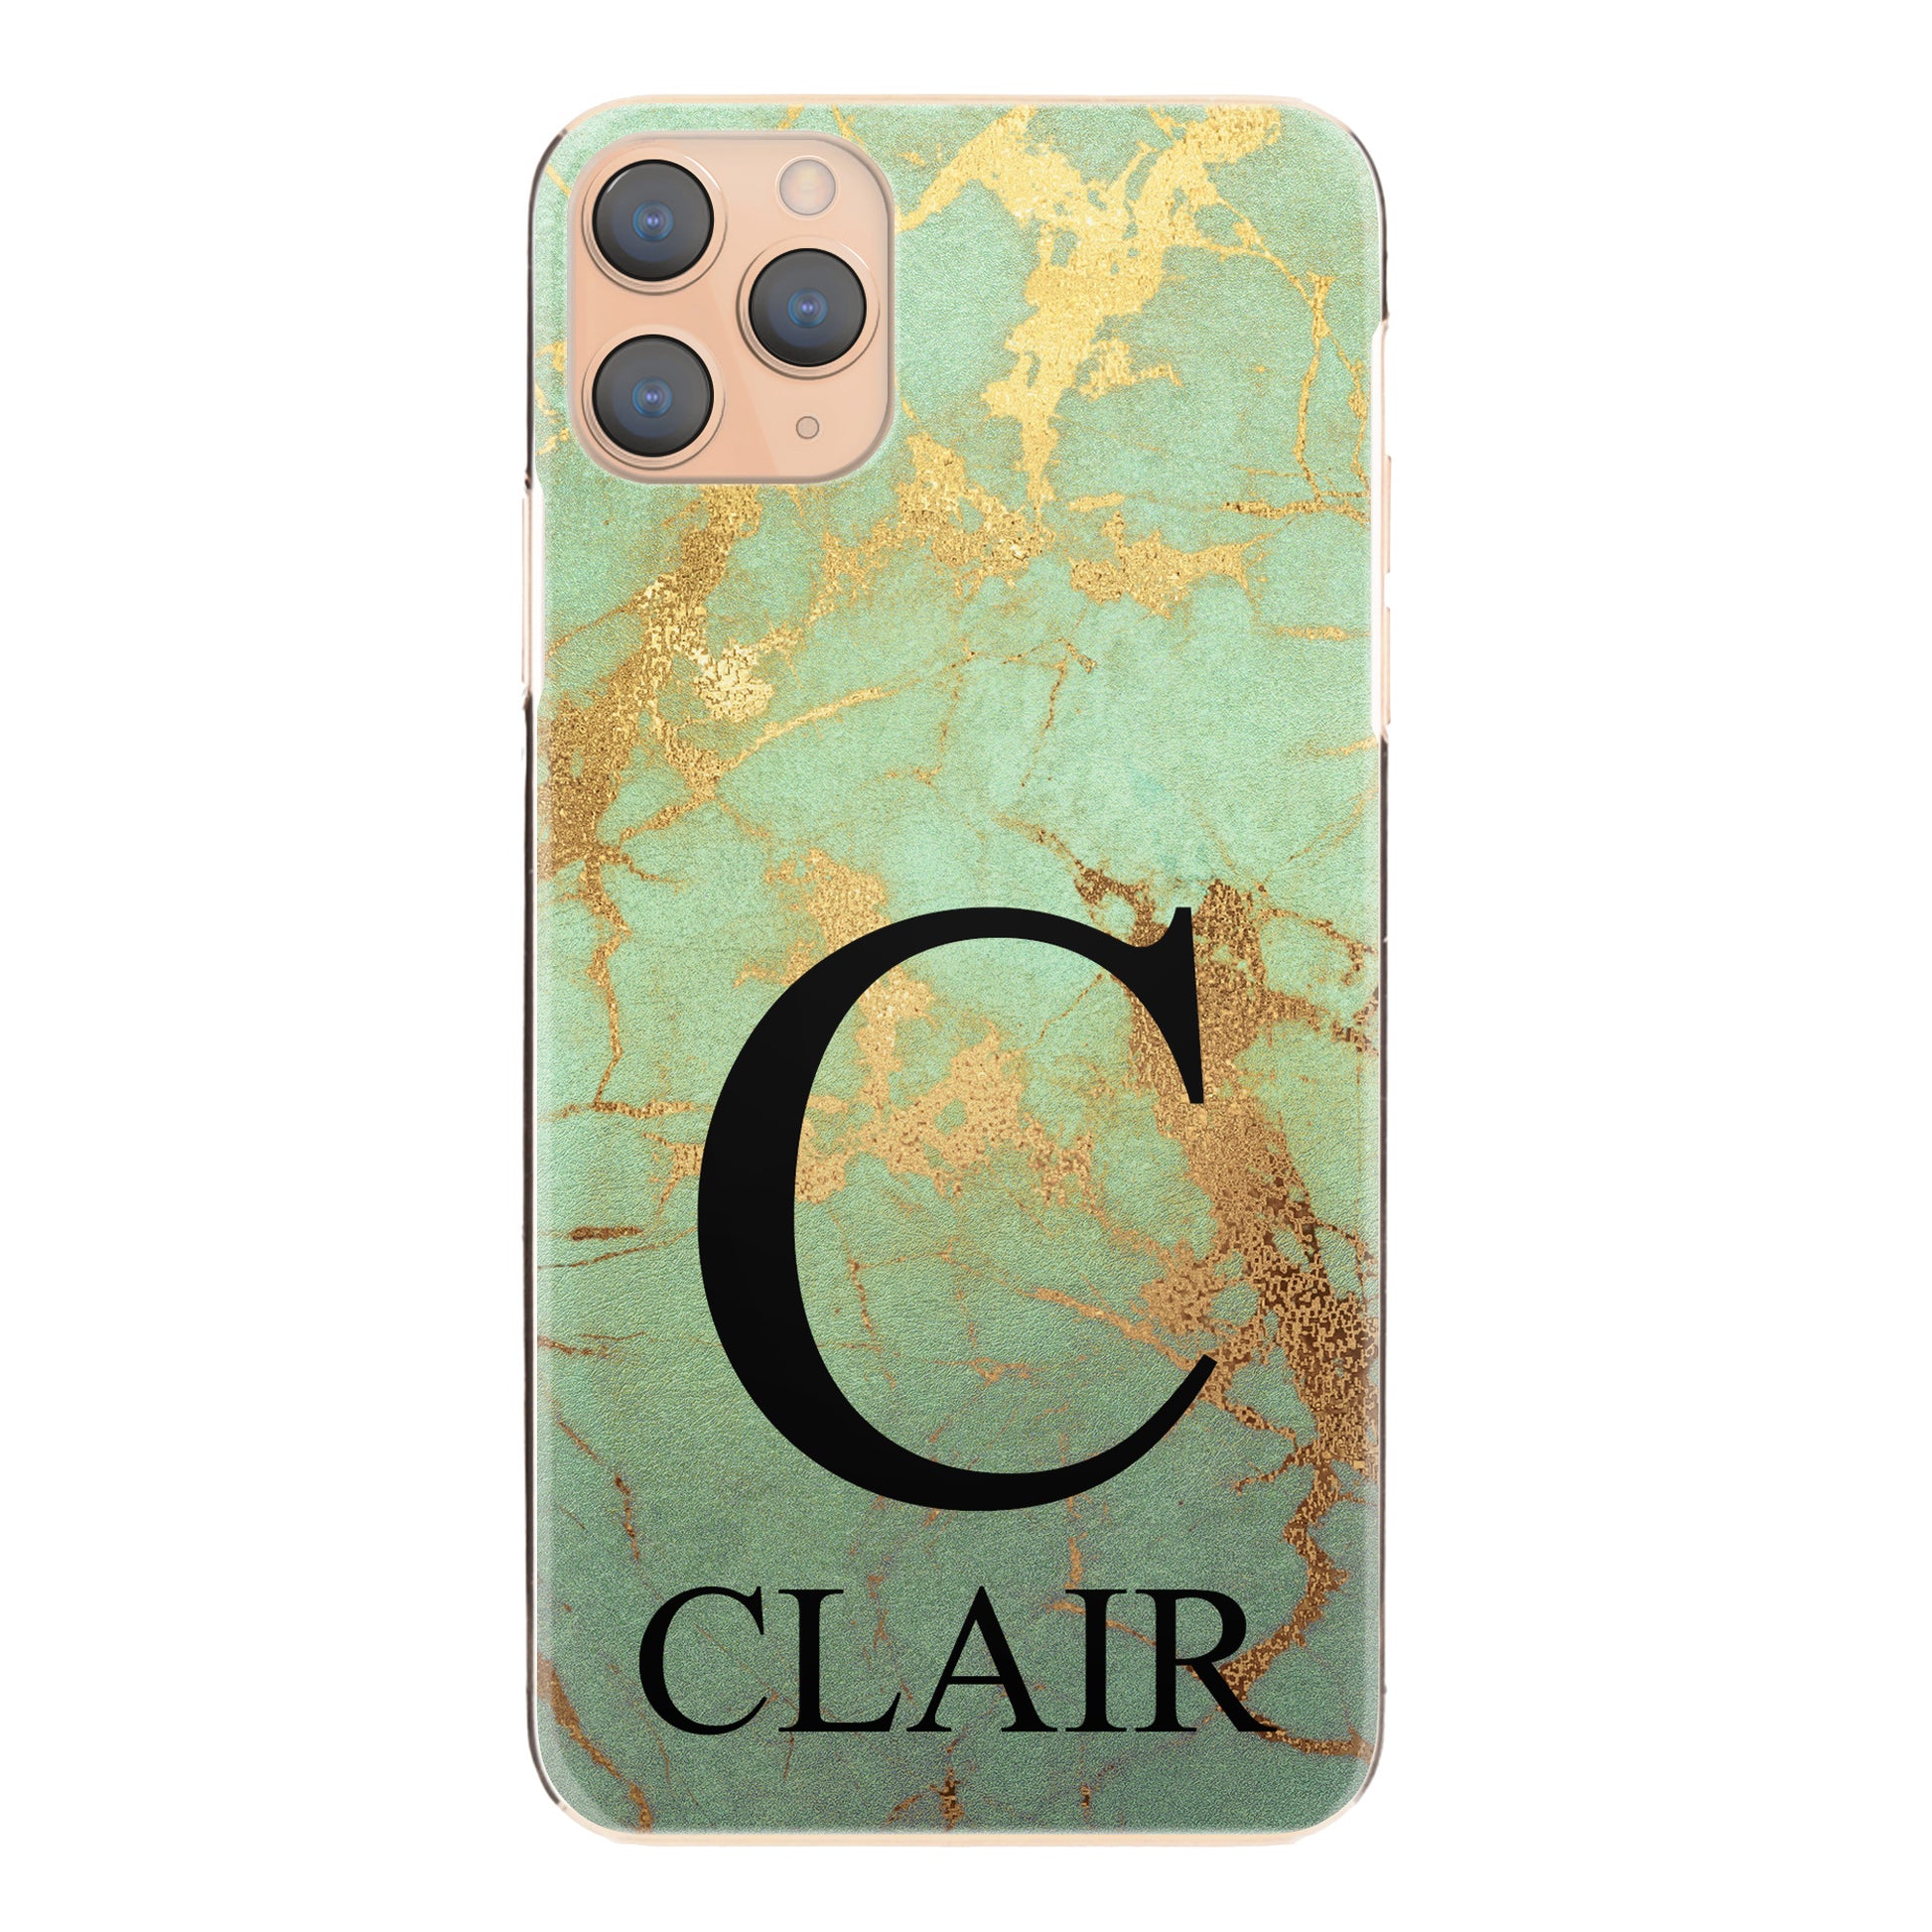 Personalised Xiaomi Phone Hard Case with Monogram and Text on Gold Infused Green Marble